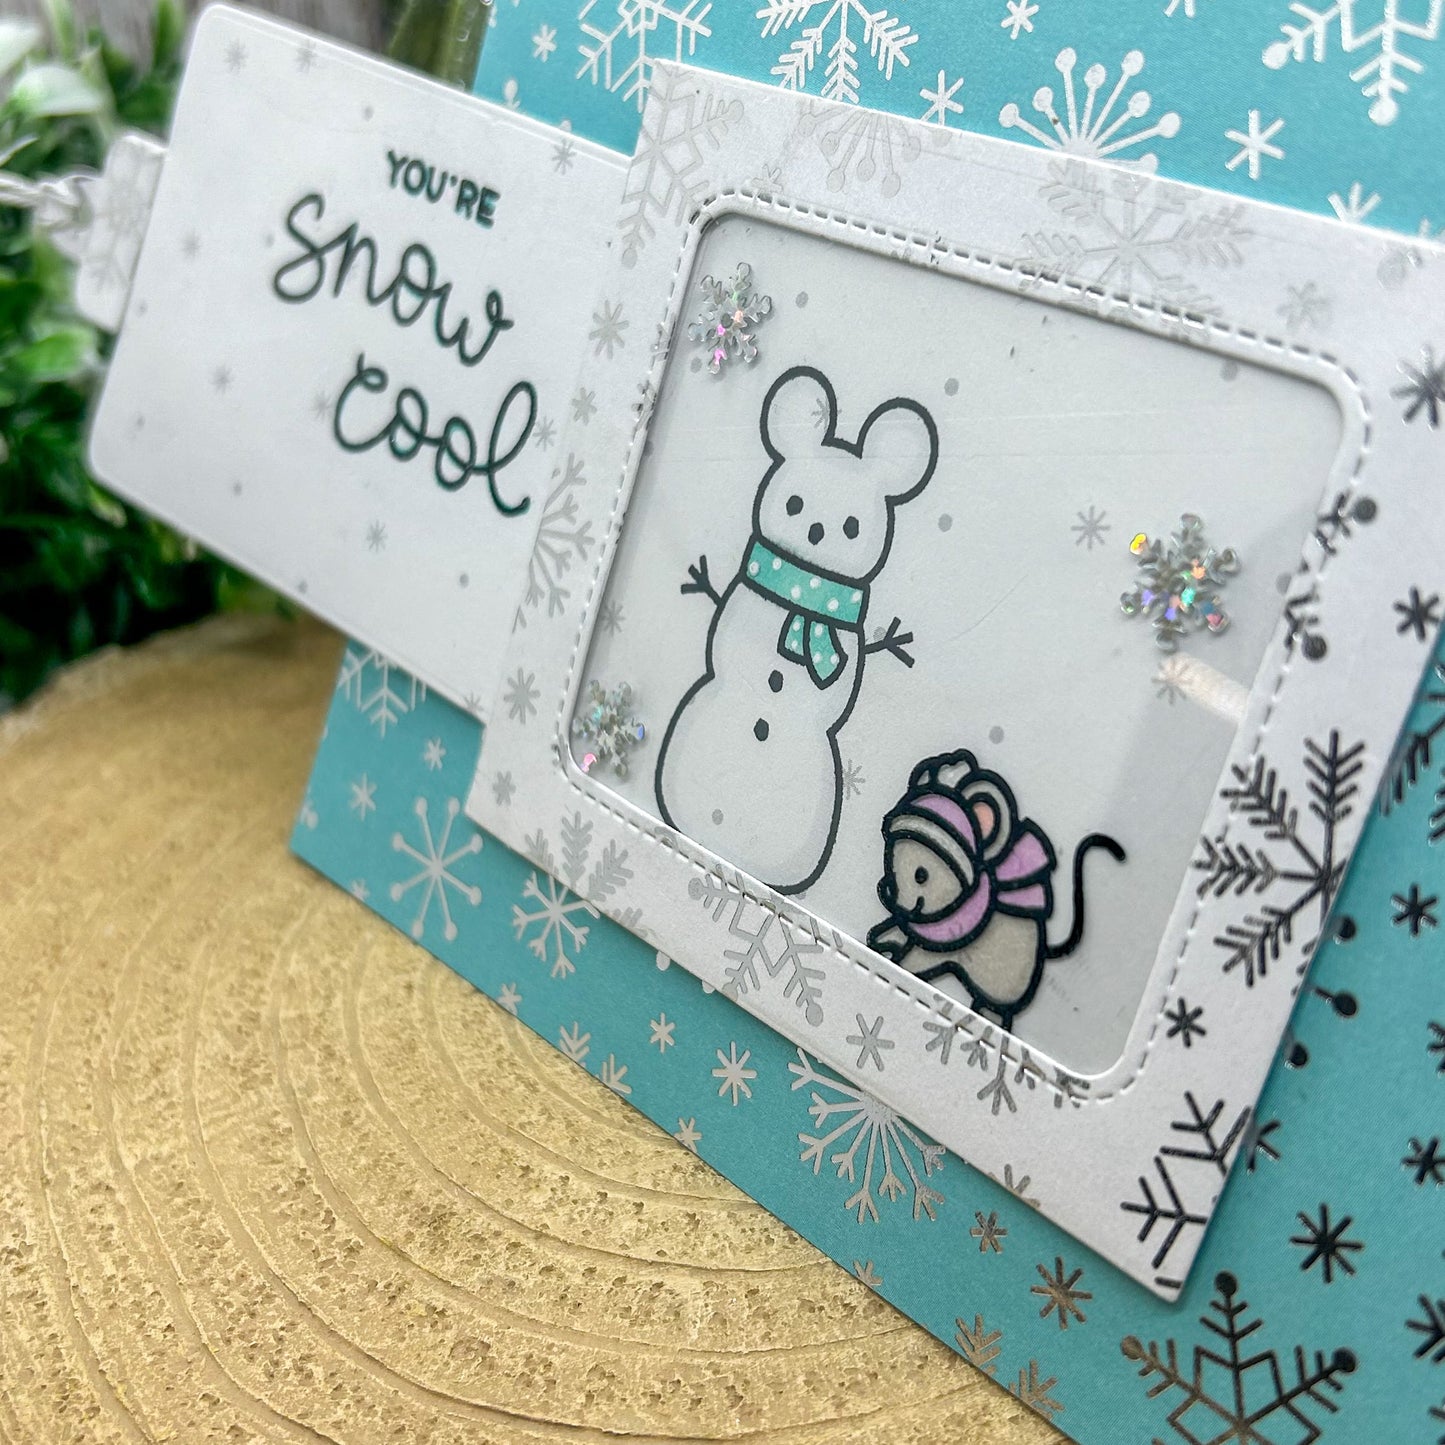 You're Snow Cool Pull Reveal Handmade Christmas Card-3